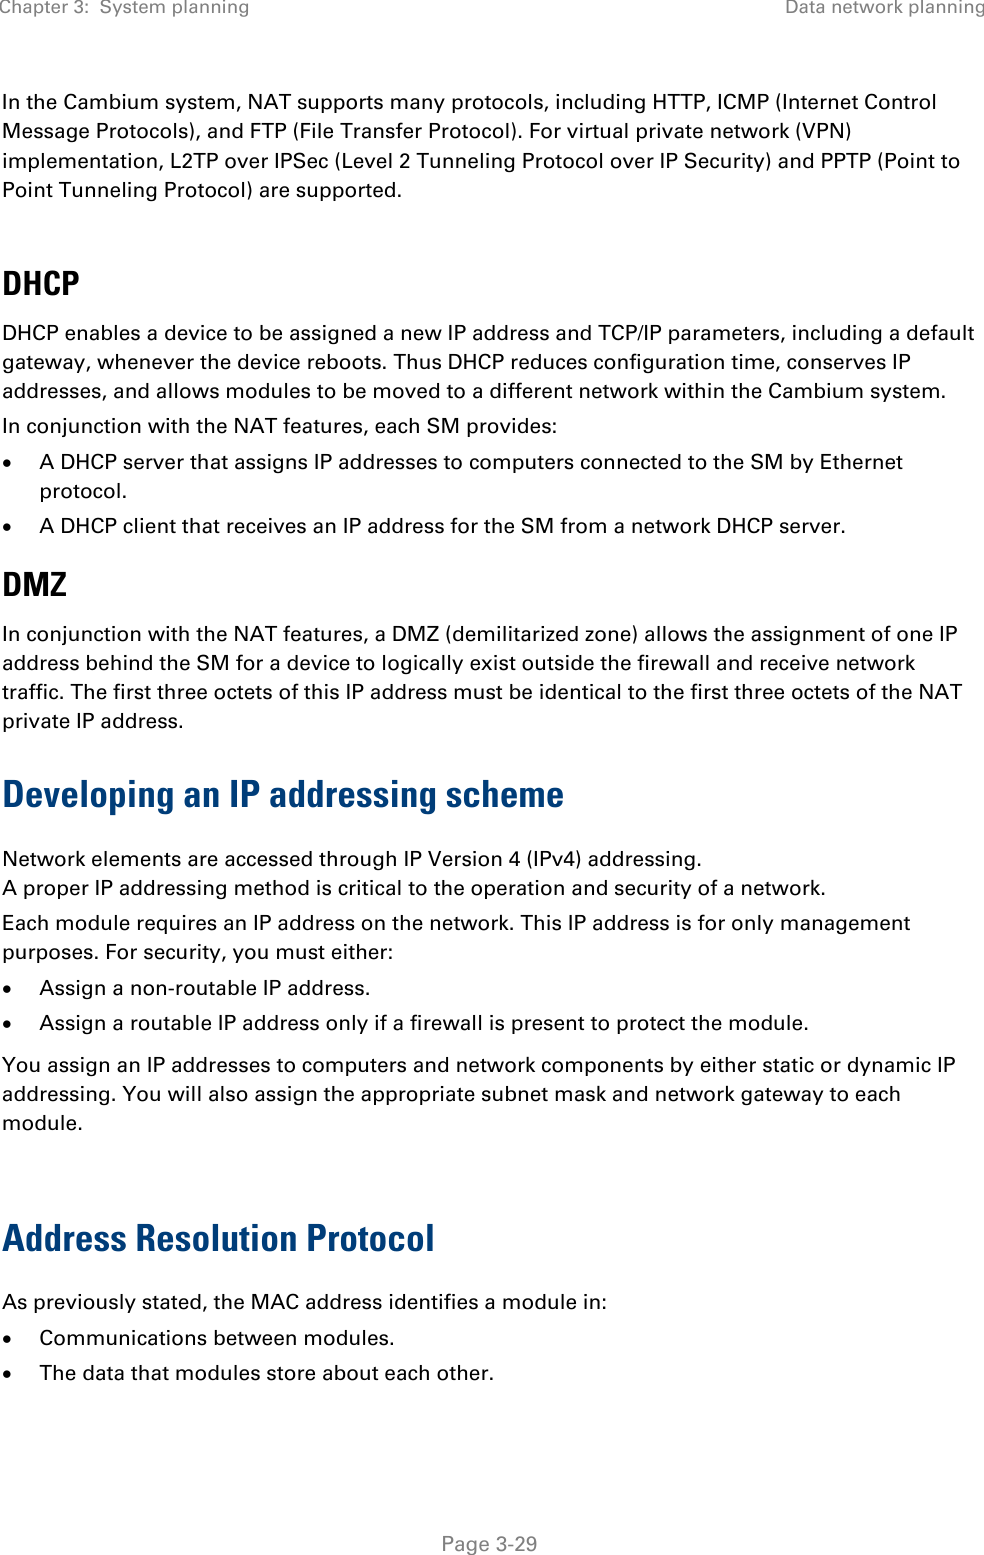 Chapter 3:  System planning  Data network planning   Page 3-29 In the Cambium system, NAT supports many protocols, including HTTP, ICMP (Internet Control Message Protocols), and FTP (File Transfer Protocol). For virtual private network (VPN) implementation, L2TP over IPSec (Level 2 Tunneling Protocol over IP Security) and PPTP (Point to Point Tunneling Protocol) are supported.   DHCP DHCP enables a device to be assigned a new IP address and TCP/IP parameters, including a default gateway, whenever the device reboots. Thus DHCP reduces configuration time, conserves IP addresses, and allows modules to be moved to a different network within the Cambium system. In conjunction with the NAT features, each SM provides:  A DHCP server that assigns IP addresses to computers connected to the SM by Ethernet protocol.  A DHCP client that receives an IP address for the SM from a network DHCP server. DMZ In conjunction with the NAT features, a DMZ (demilitarized zone) allows the assignment of one IP address behind the SM for a device to logically exist outside the firewall and receive network traffic. The first three octets of this IP address must be identical to the first three octets of the NAT private IP address. Developing an IP addressing scheme Network elements are accessed through IP Version 4 (IPv4) addressing.  A proper IP addressing method is critical to the operation and security of a network. Each module requires an IP address on the network. This IP address is for only management purposes. For security, you must either:  Assign a non-routable IP address.  Assign a routable IP address only if a firewall is present to protect the module.  You assign an IP addresses to computers and network components by either static or dynamic IP addressing. You will also assign the appropriate subnet mask and network gateway to each module.   Address Resolution Protocol As previously stated, the MAC address identifies a module in:  Communications between modules.  The data that modules store about each other. 